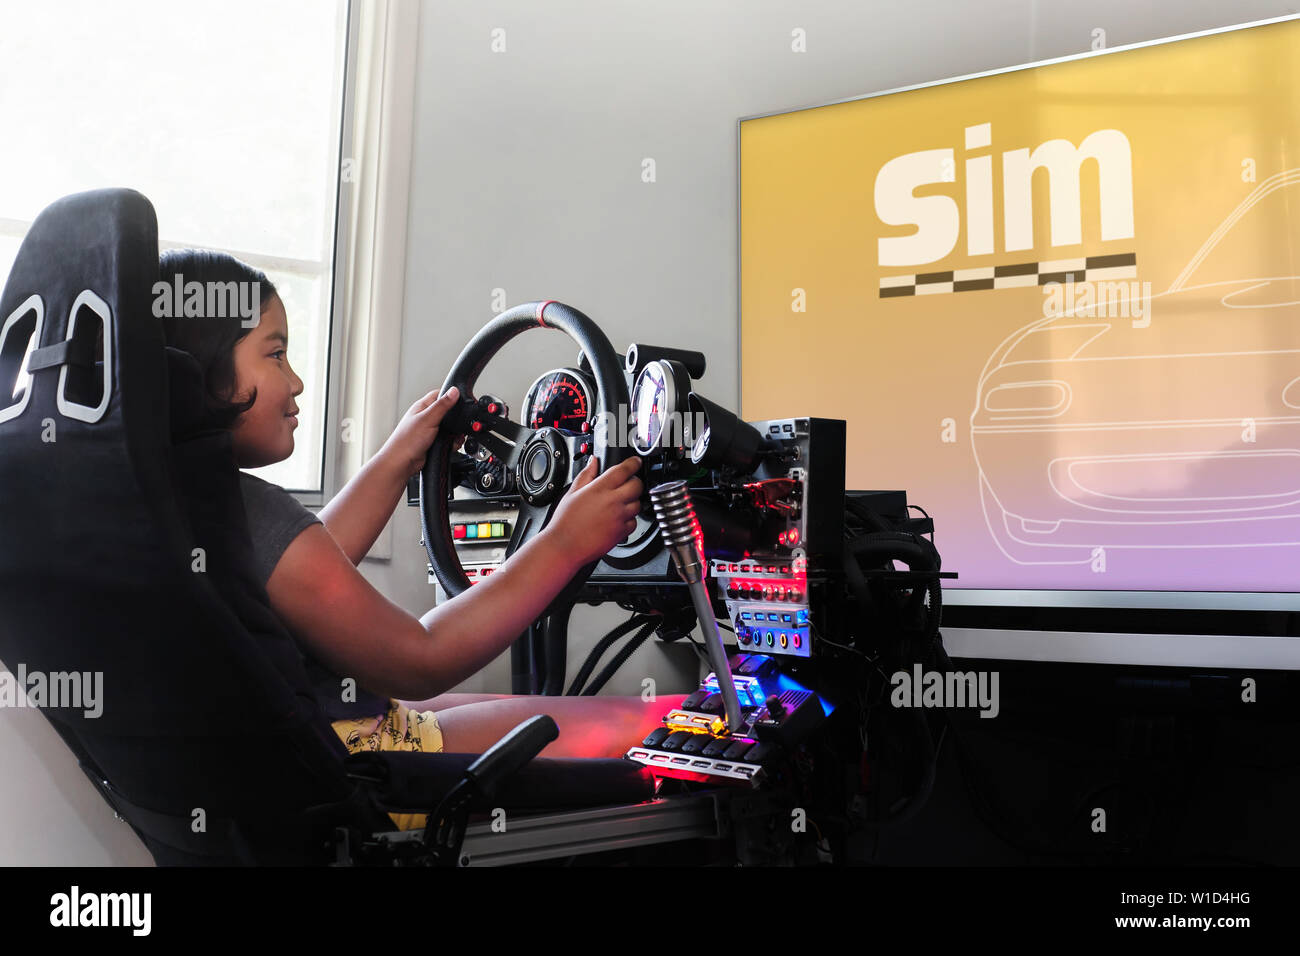 A little girl sitting in a gaming cockpit and holding the race steering wheel to play a racing simulation. Stock Photo